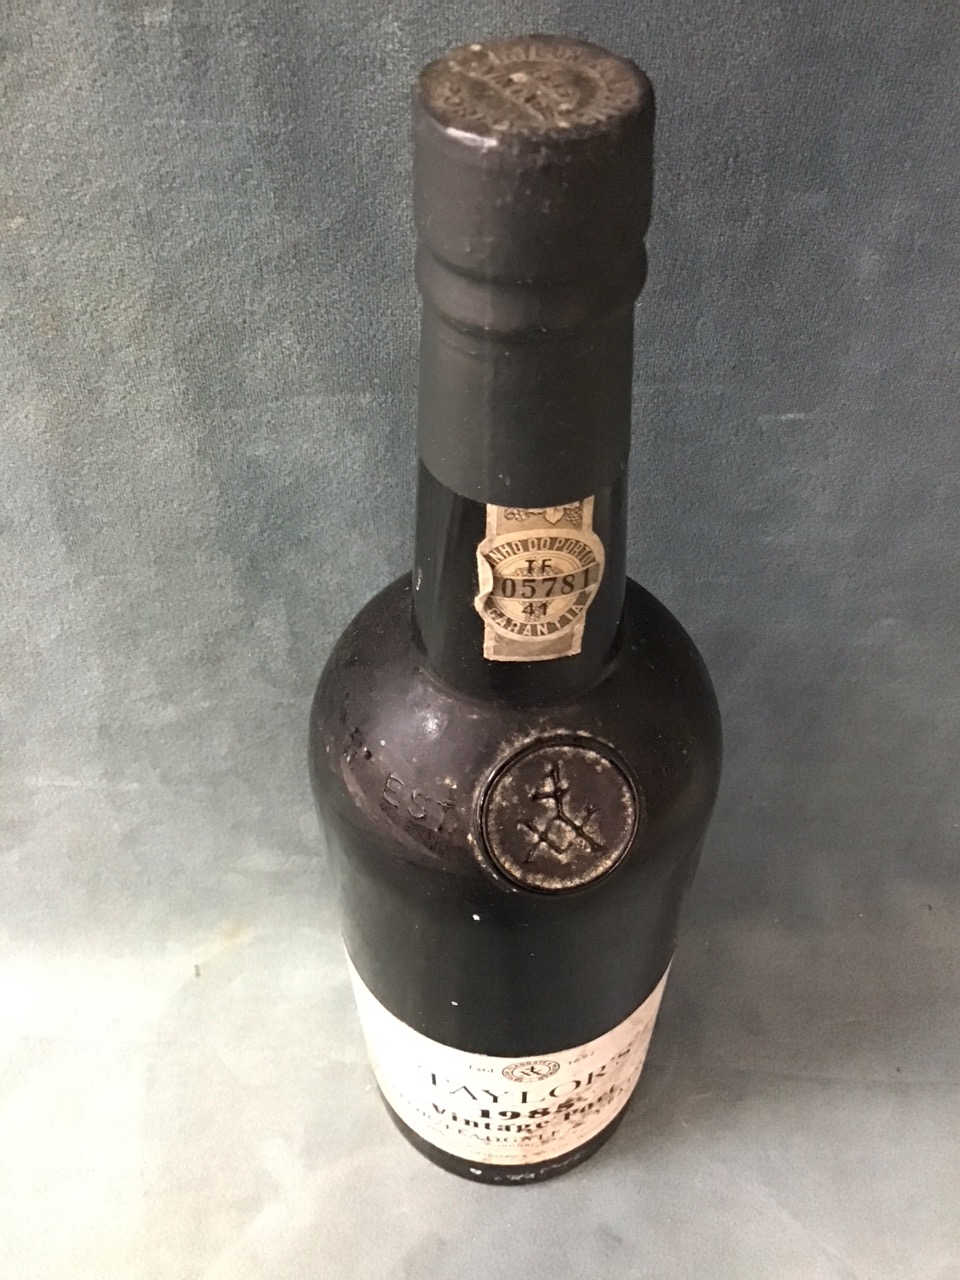 A 1985 bottle of Taylors vintage port, the seal numbered 405781. (75cl) - Image 3 of 3